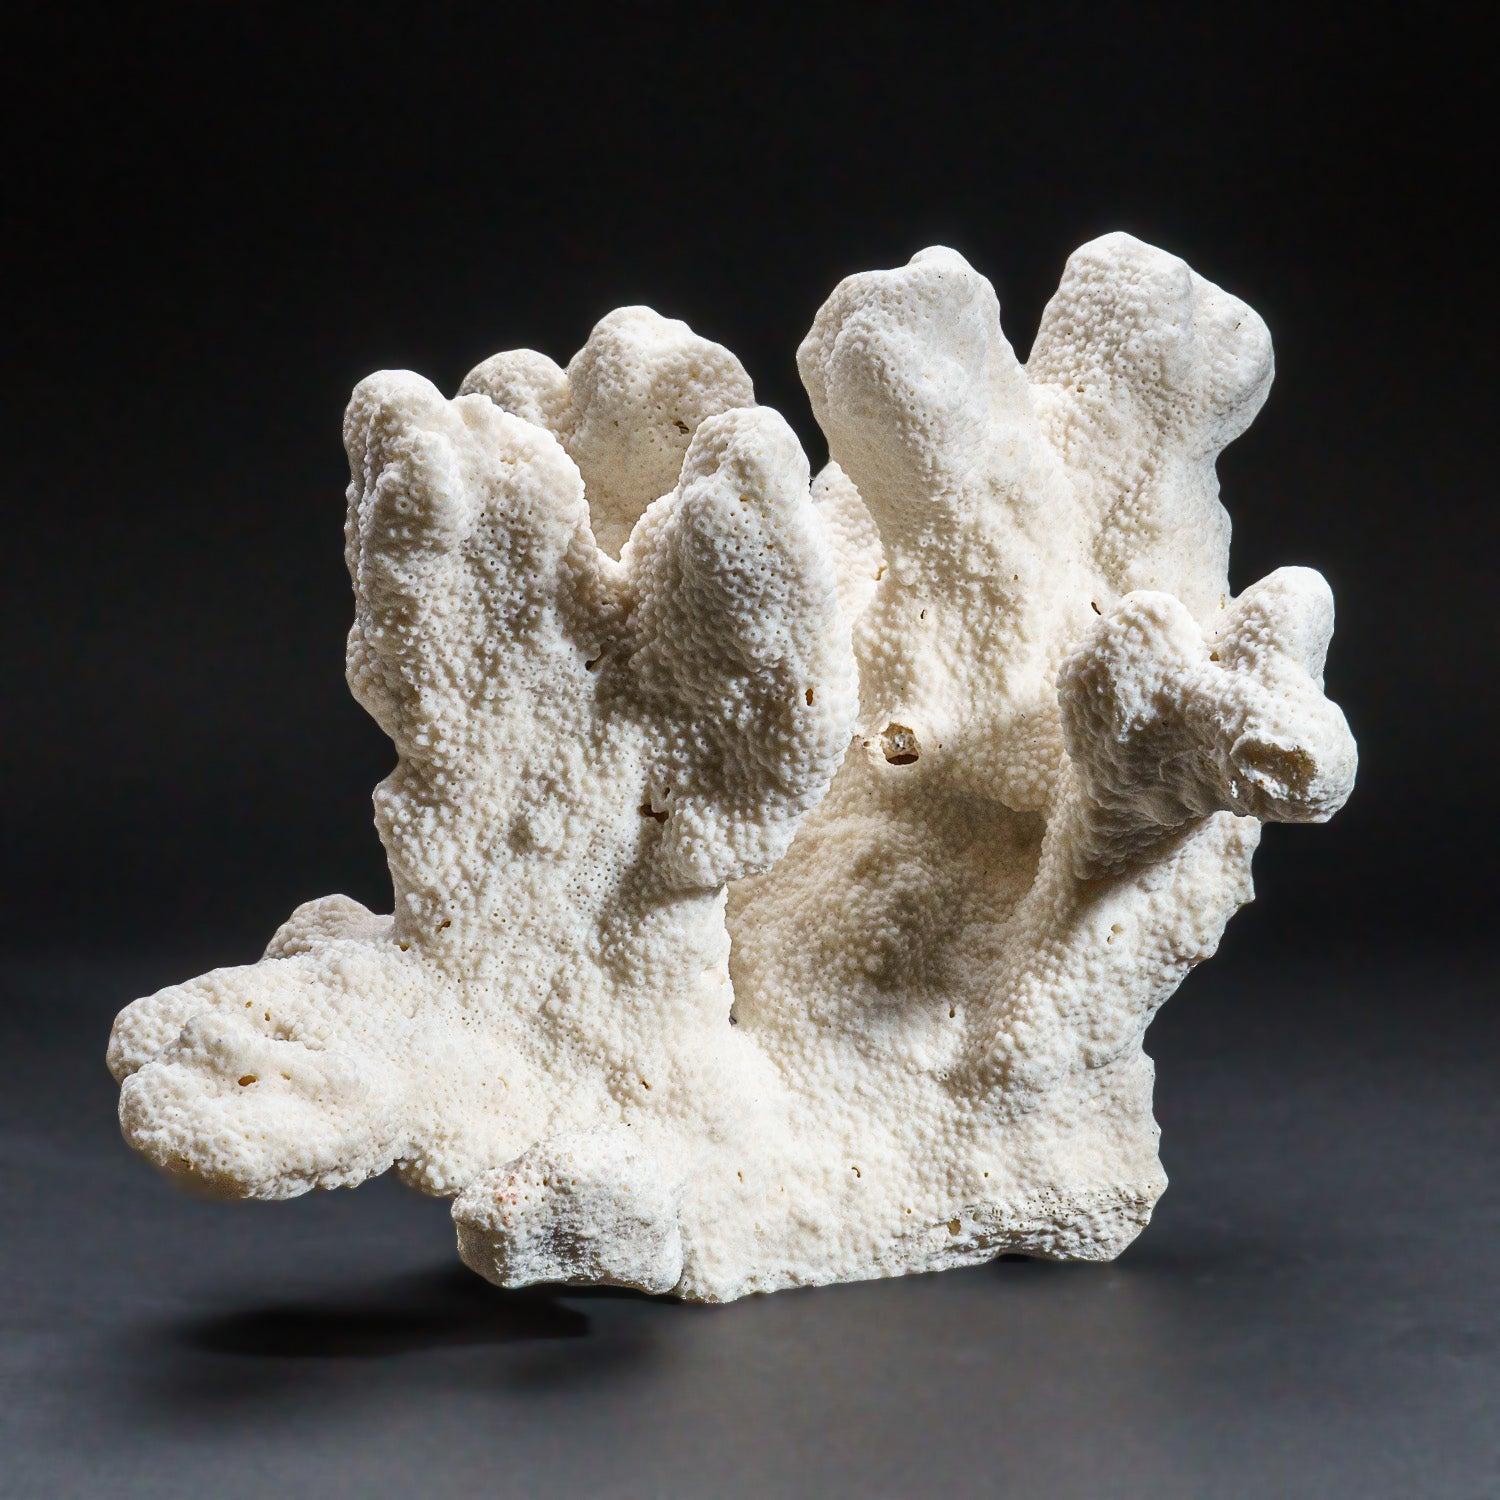 Genuine White Cat's Paw Coral (5.5 lbs)